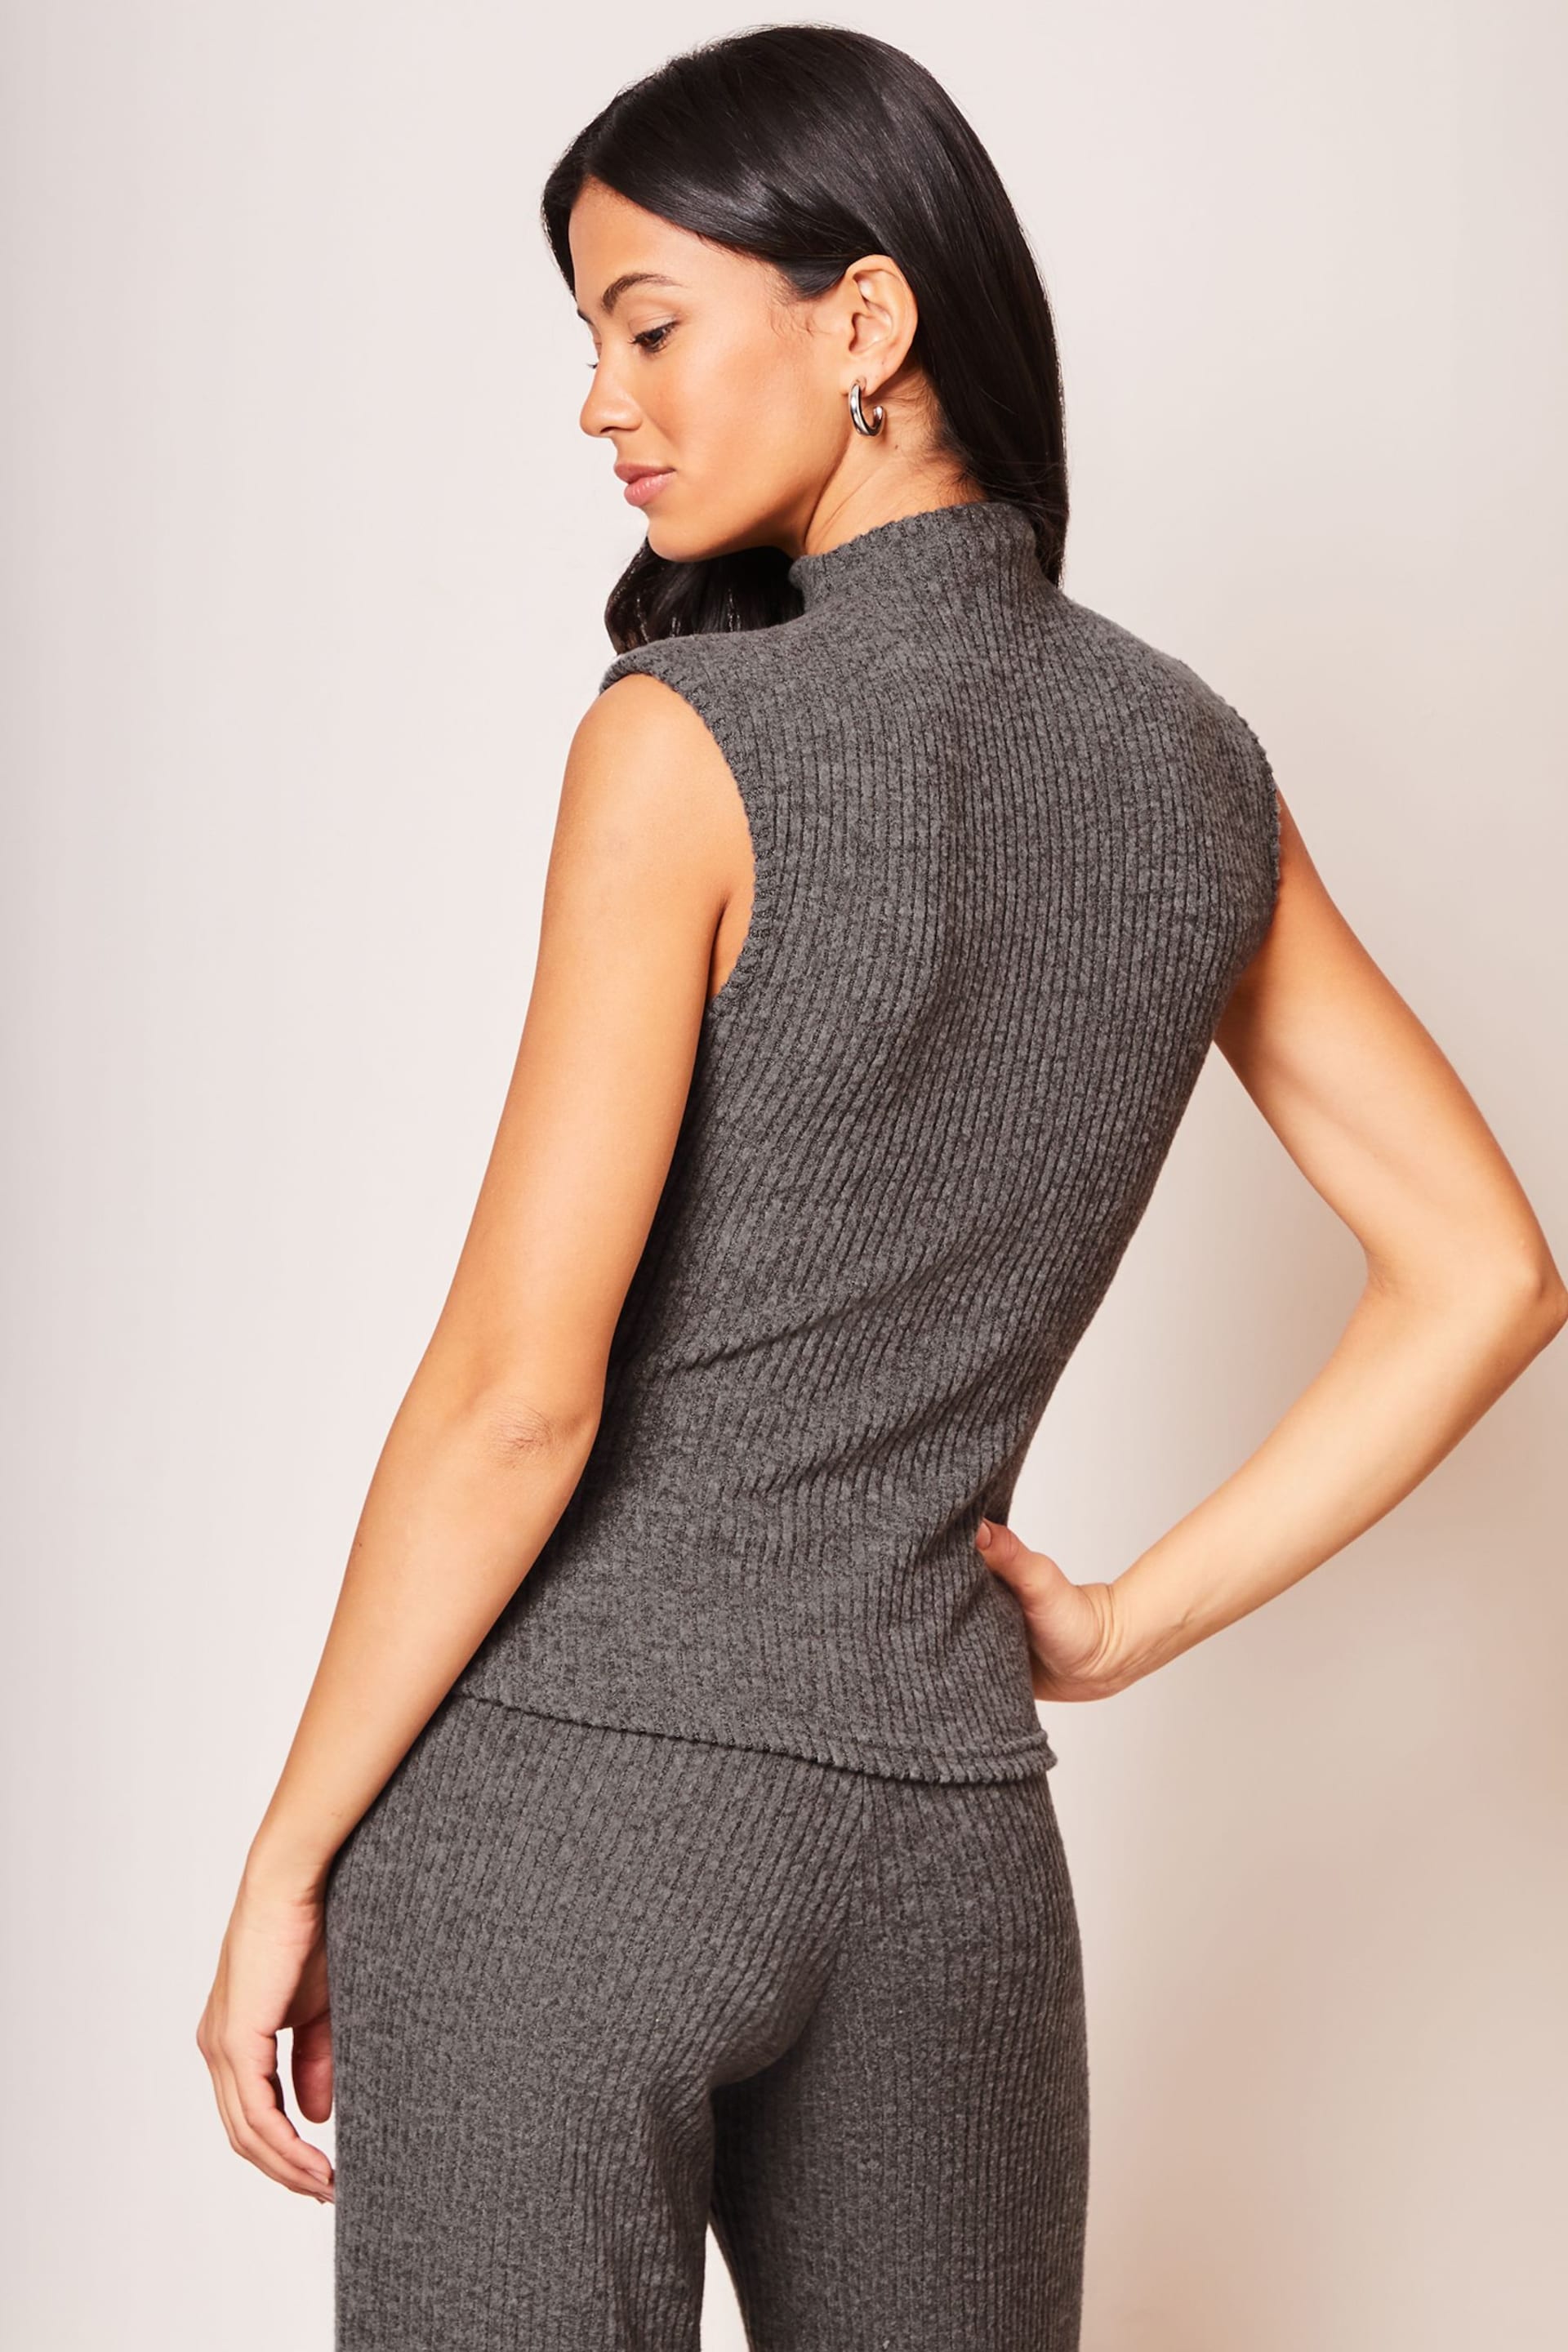 Lipsy Grey Cosy High Neck Knitted Vest Top - Image 2 of 4